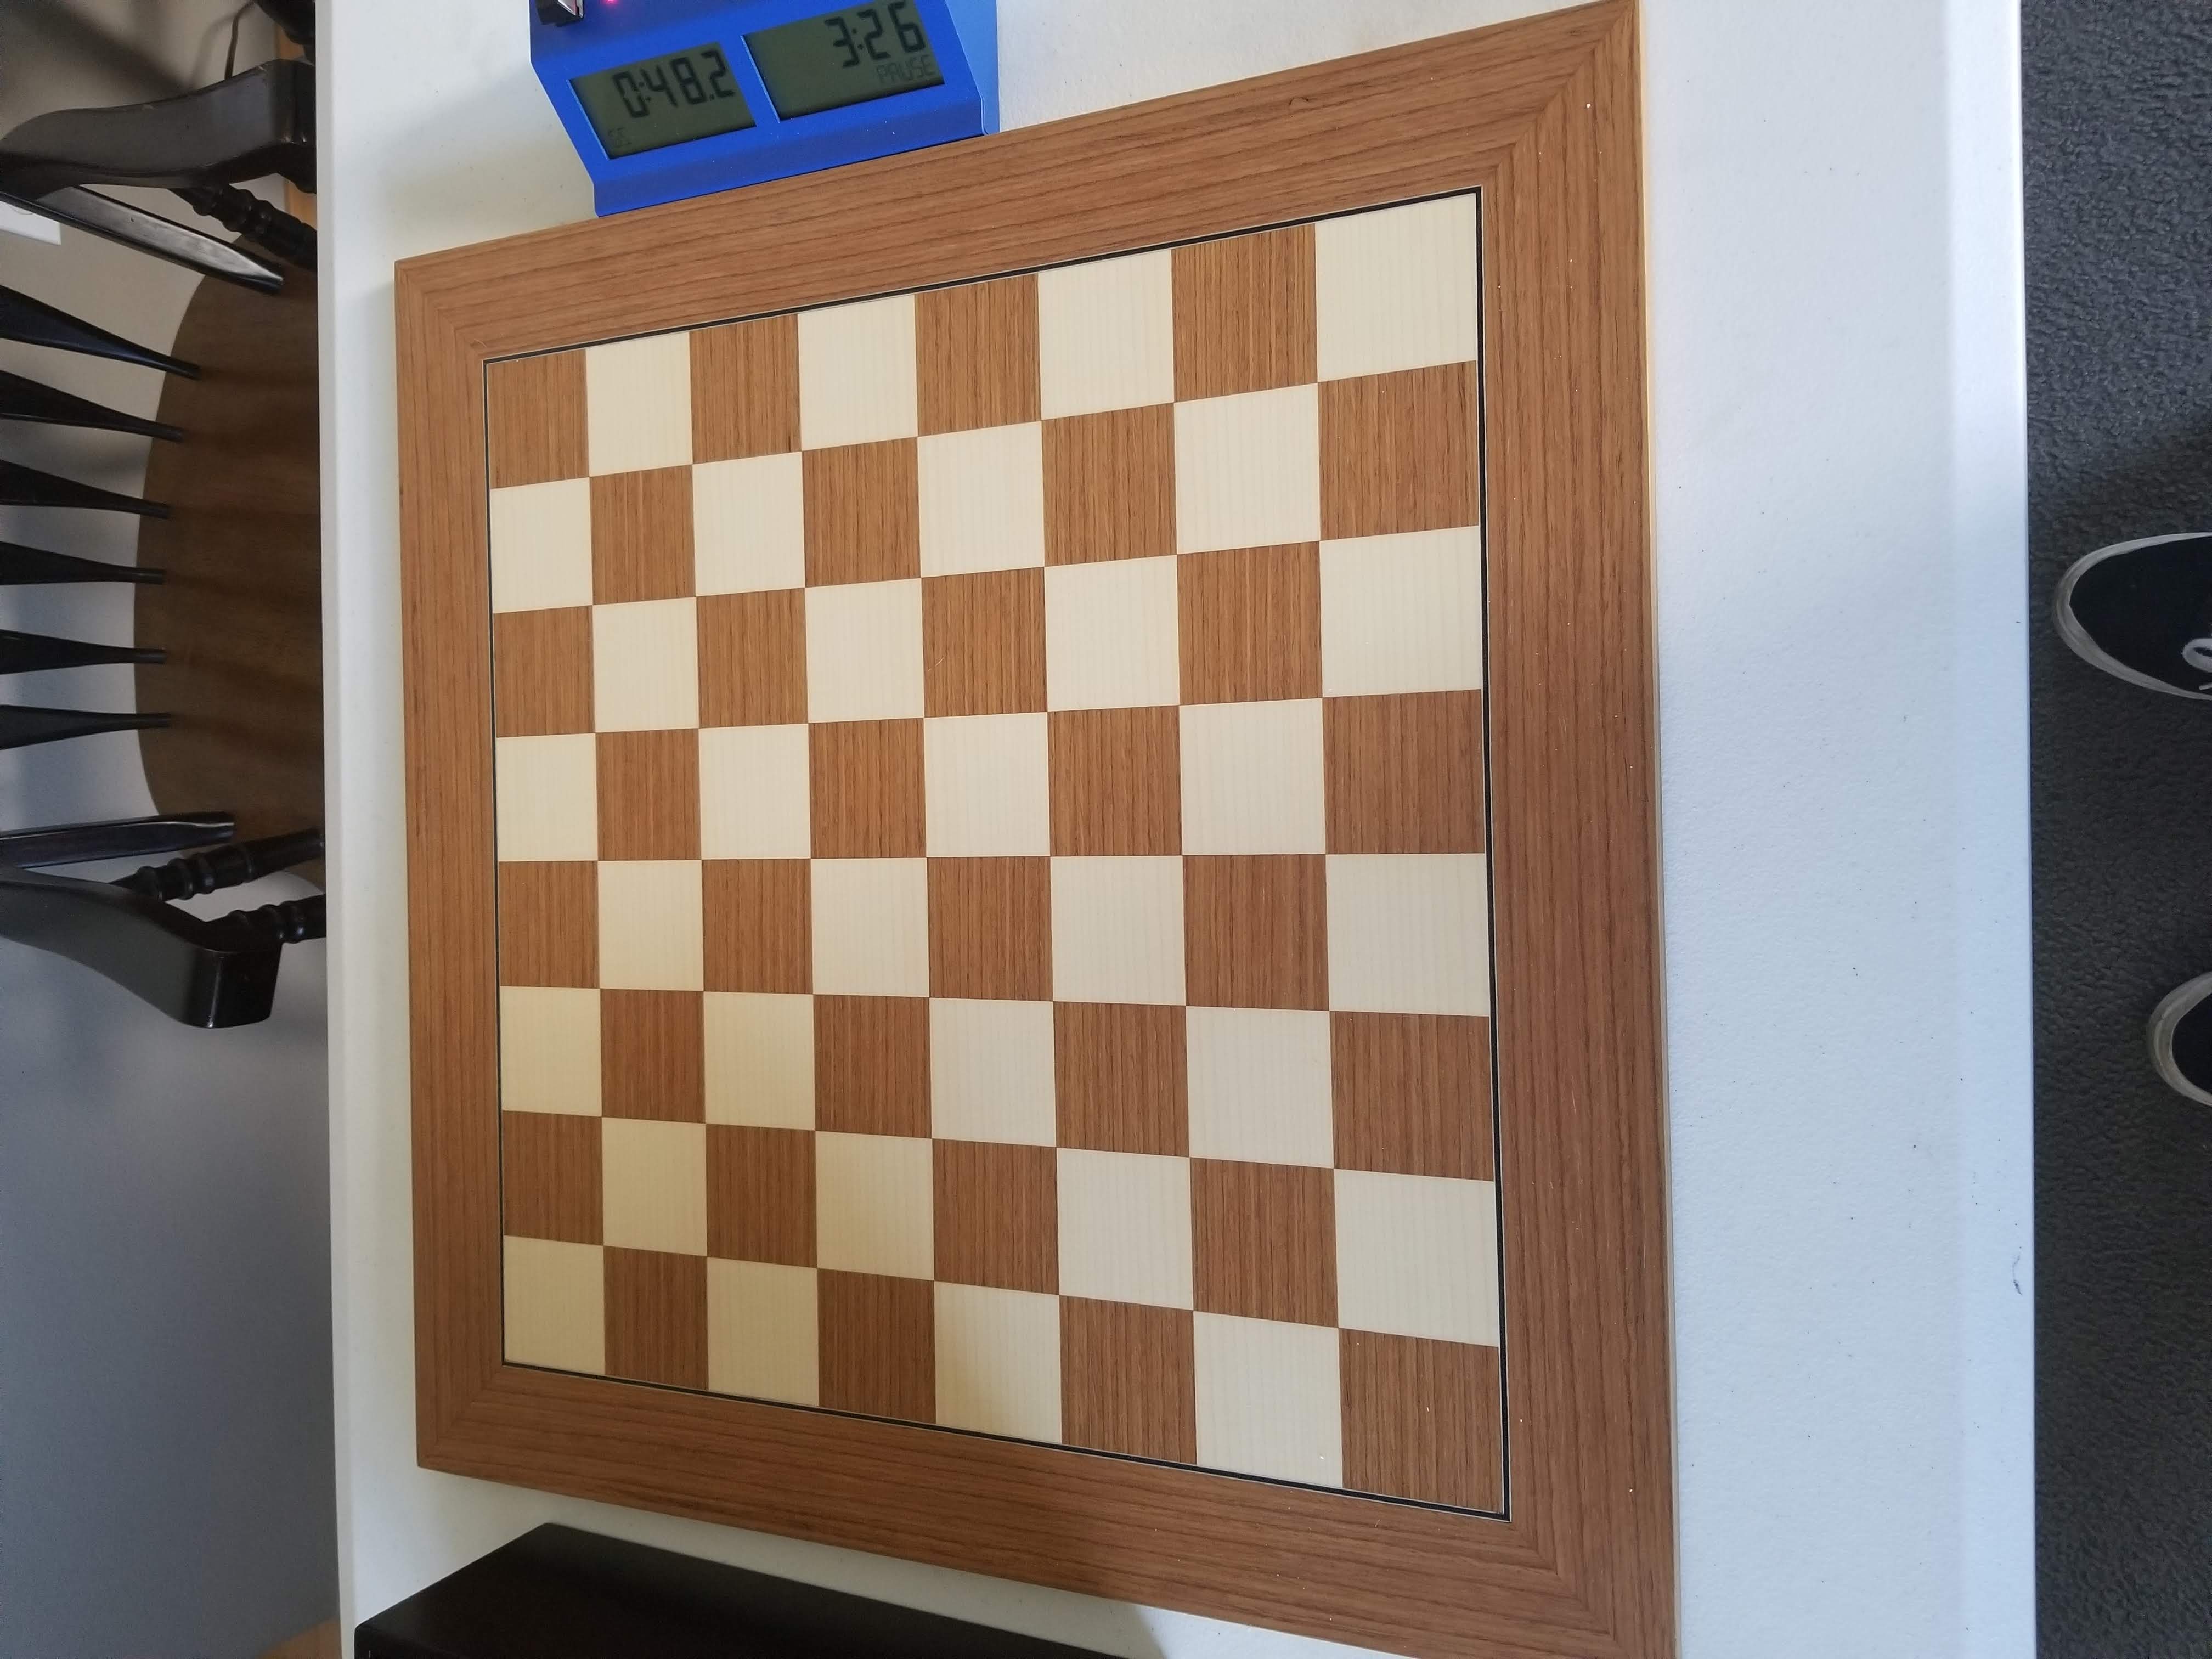 Chess Armory OK01 15" Chess Set Wood for sale online 